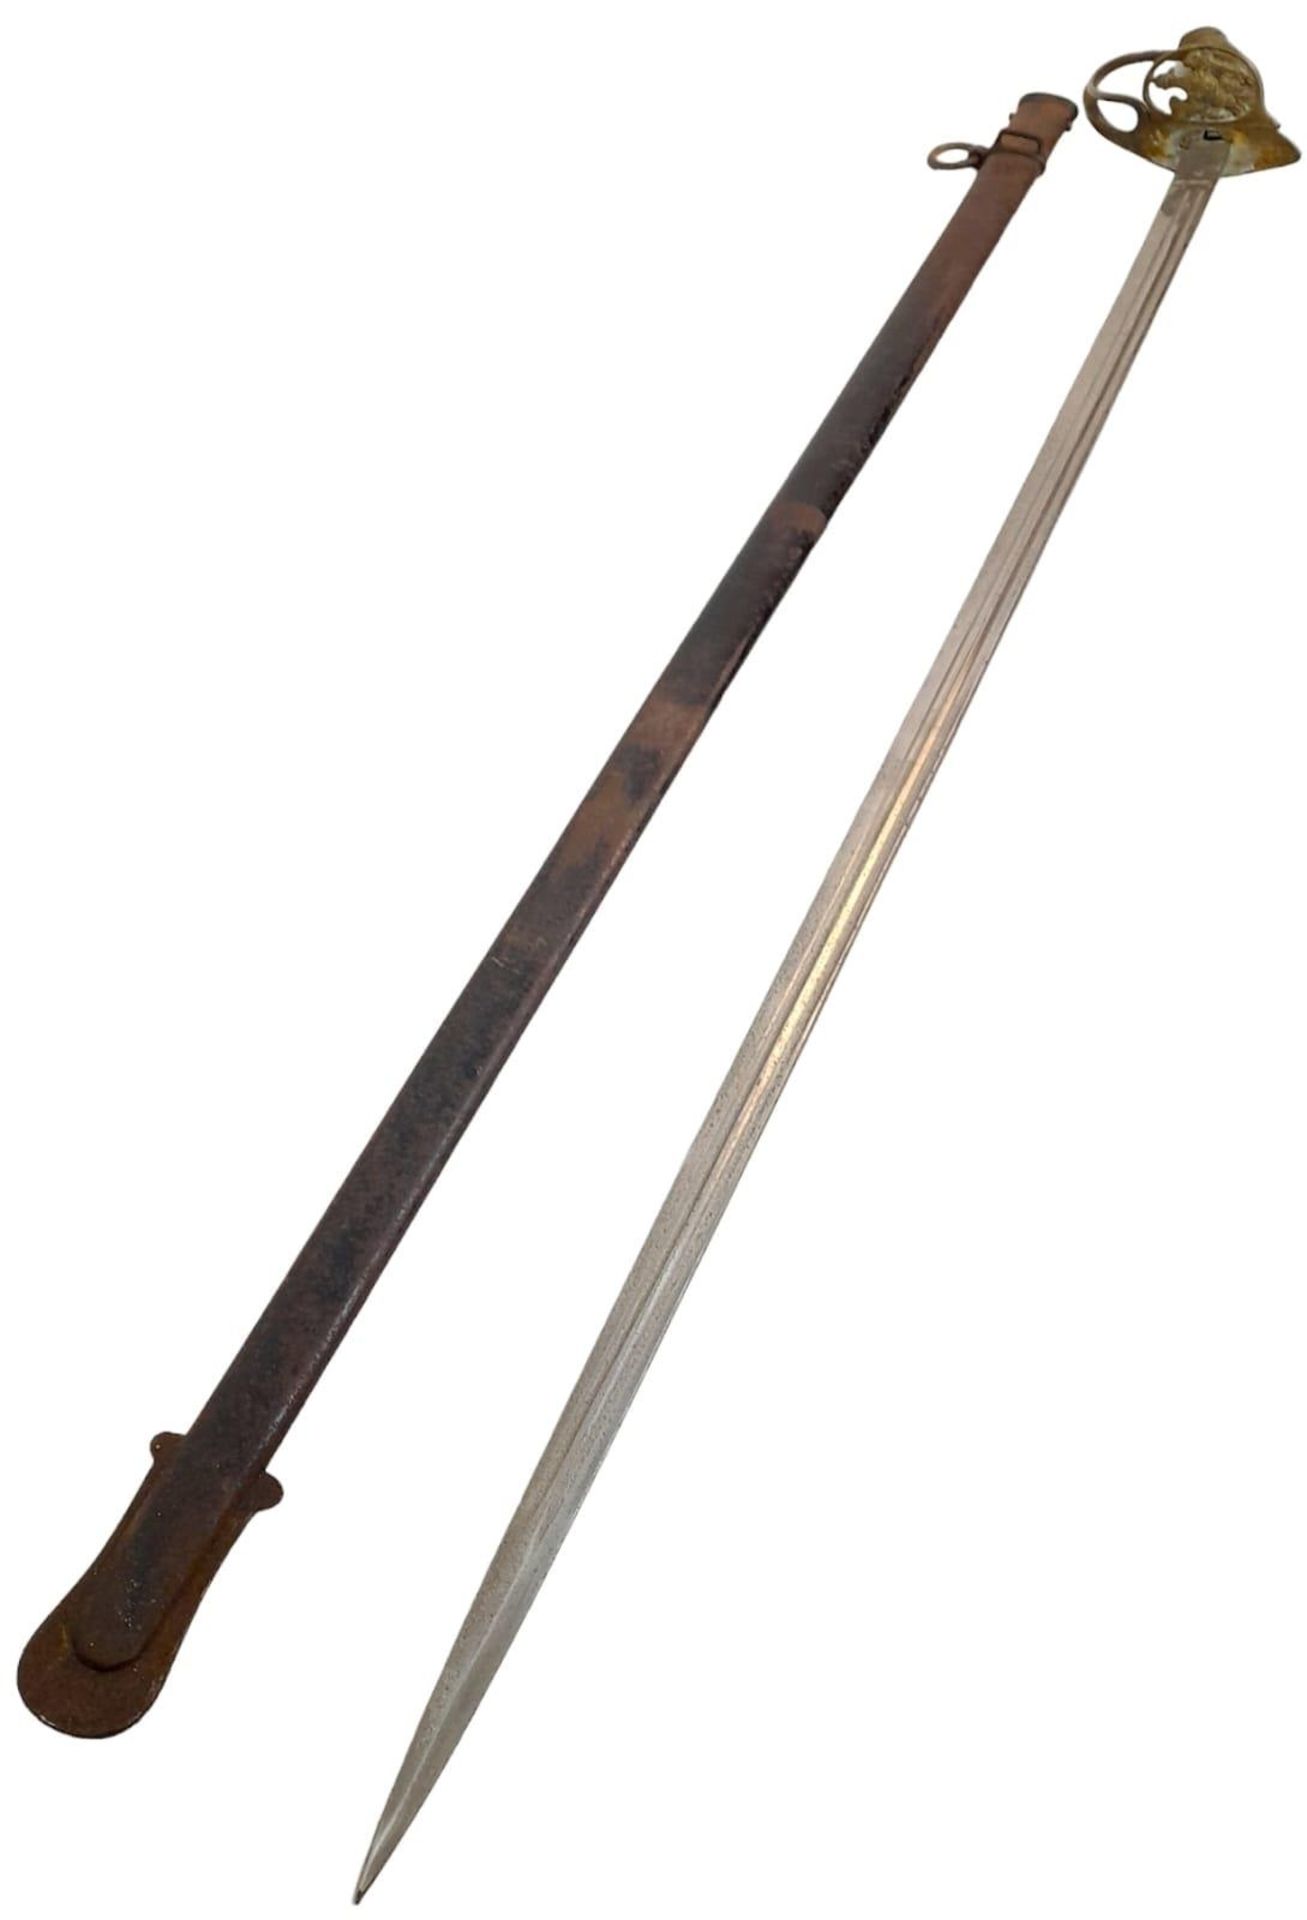 An Antique Prussian Cavalry Sword. Straight blade. Markings of A C S with a scale. Gilt brass hilt